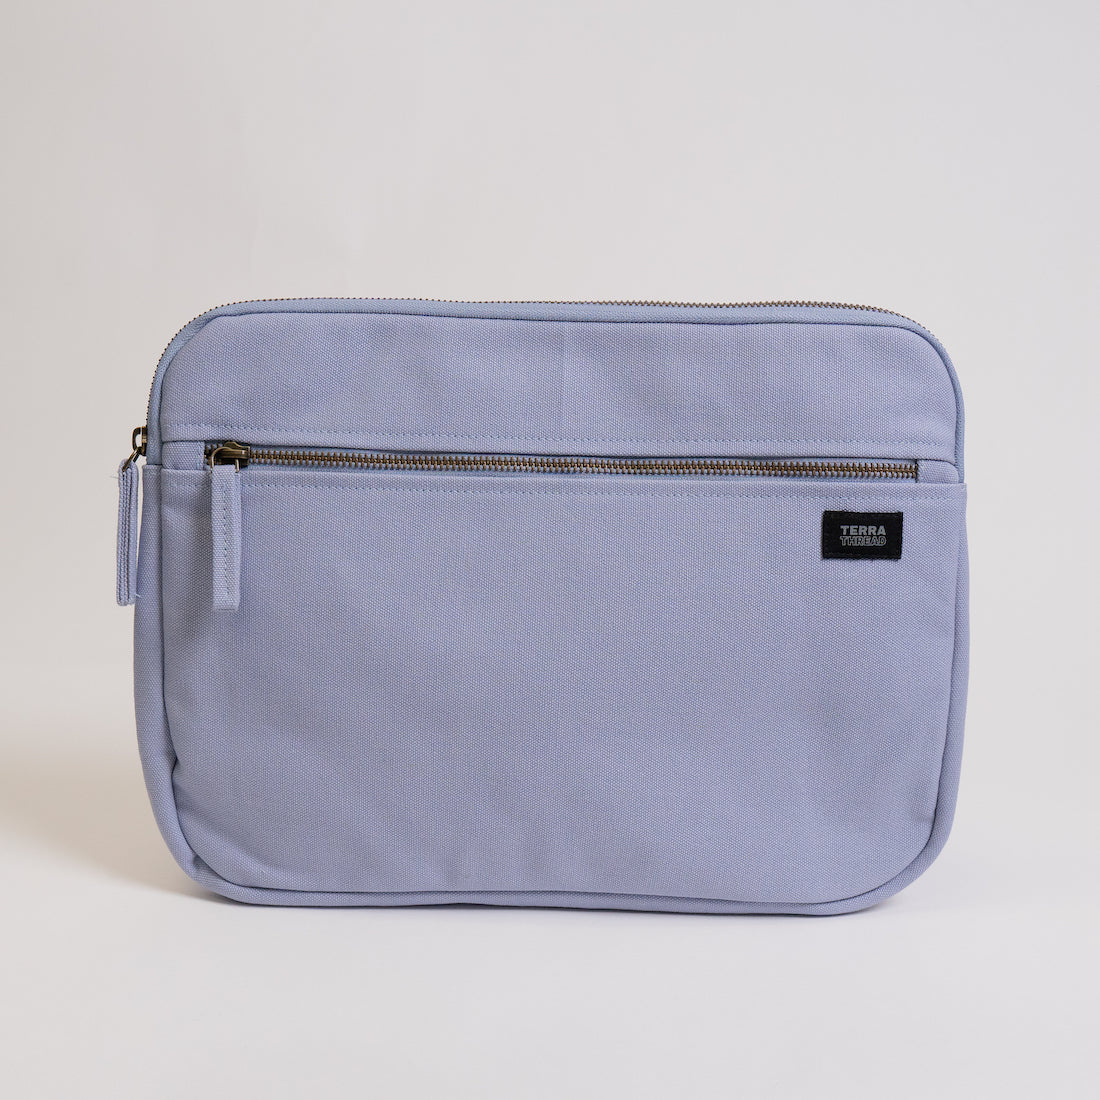 AmazonBasics Rolling Laptop Case Review: Basic and Budget-Friendly